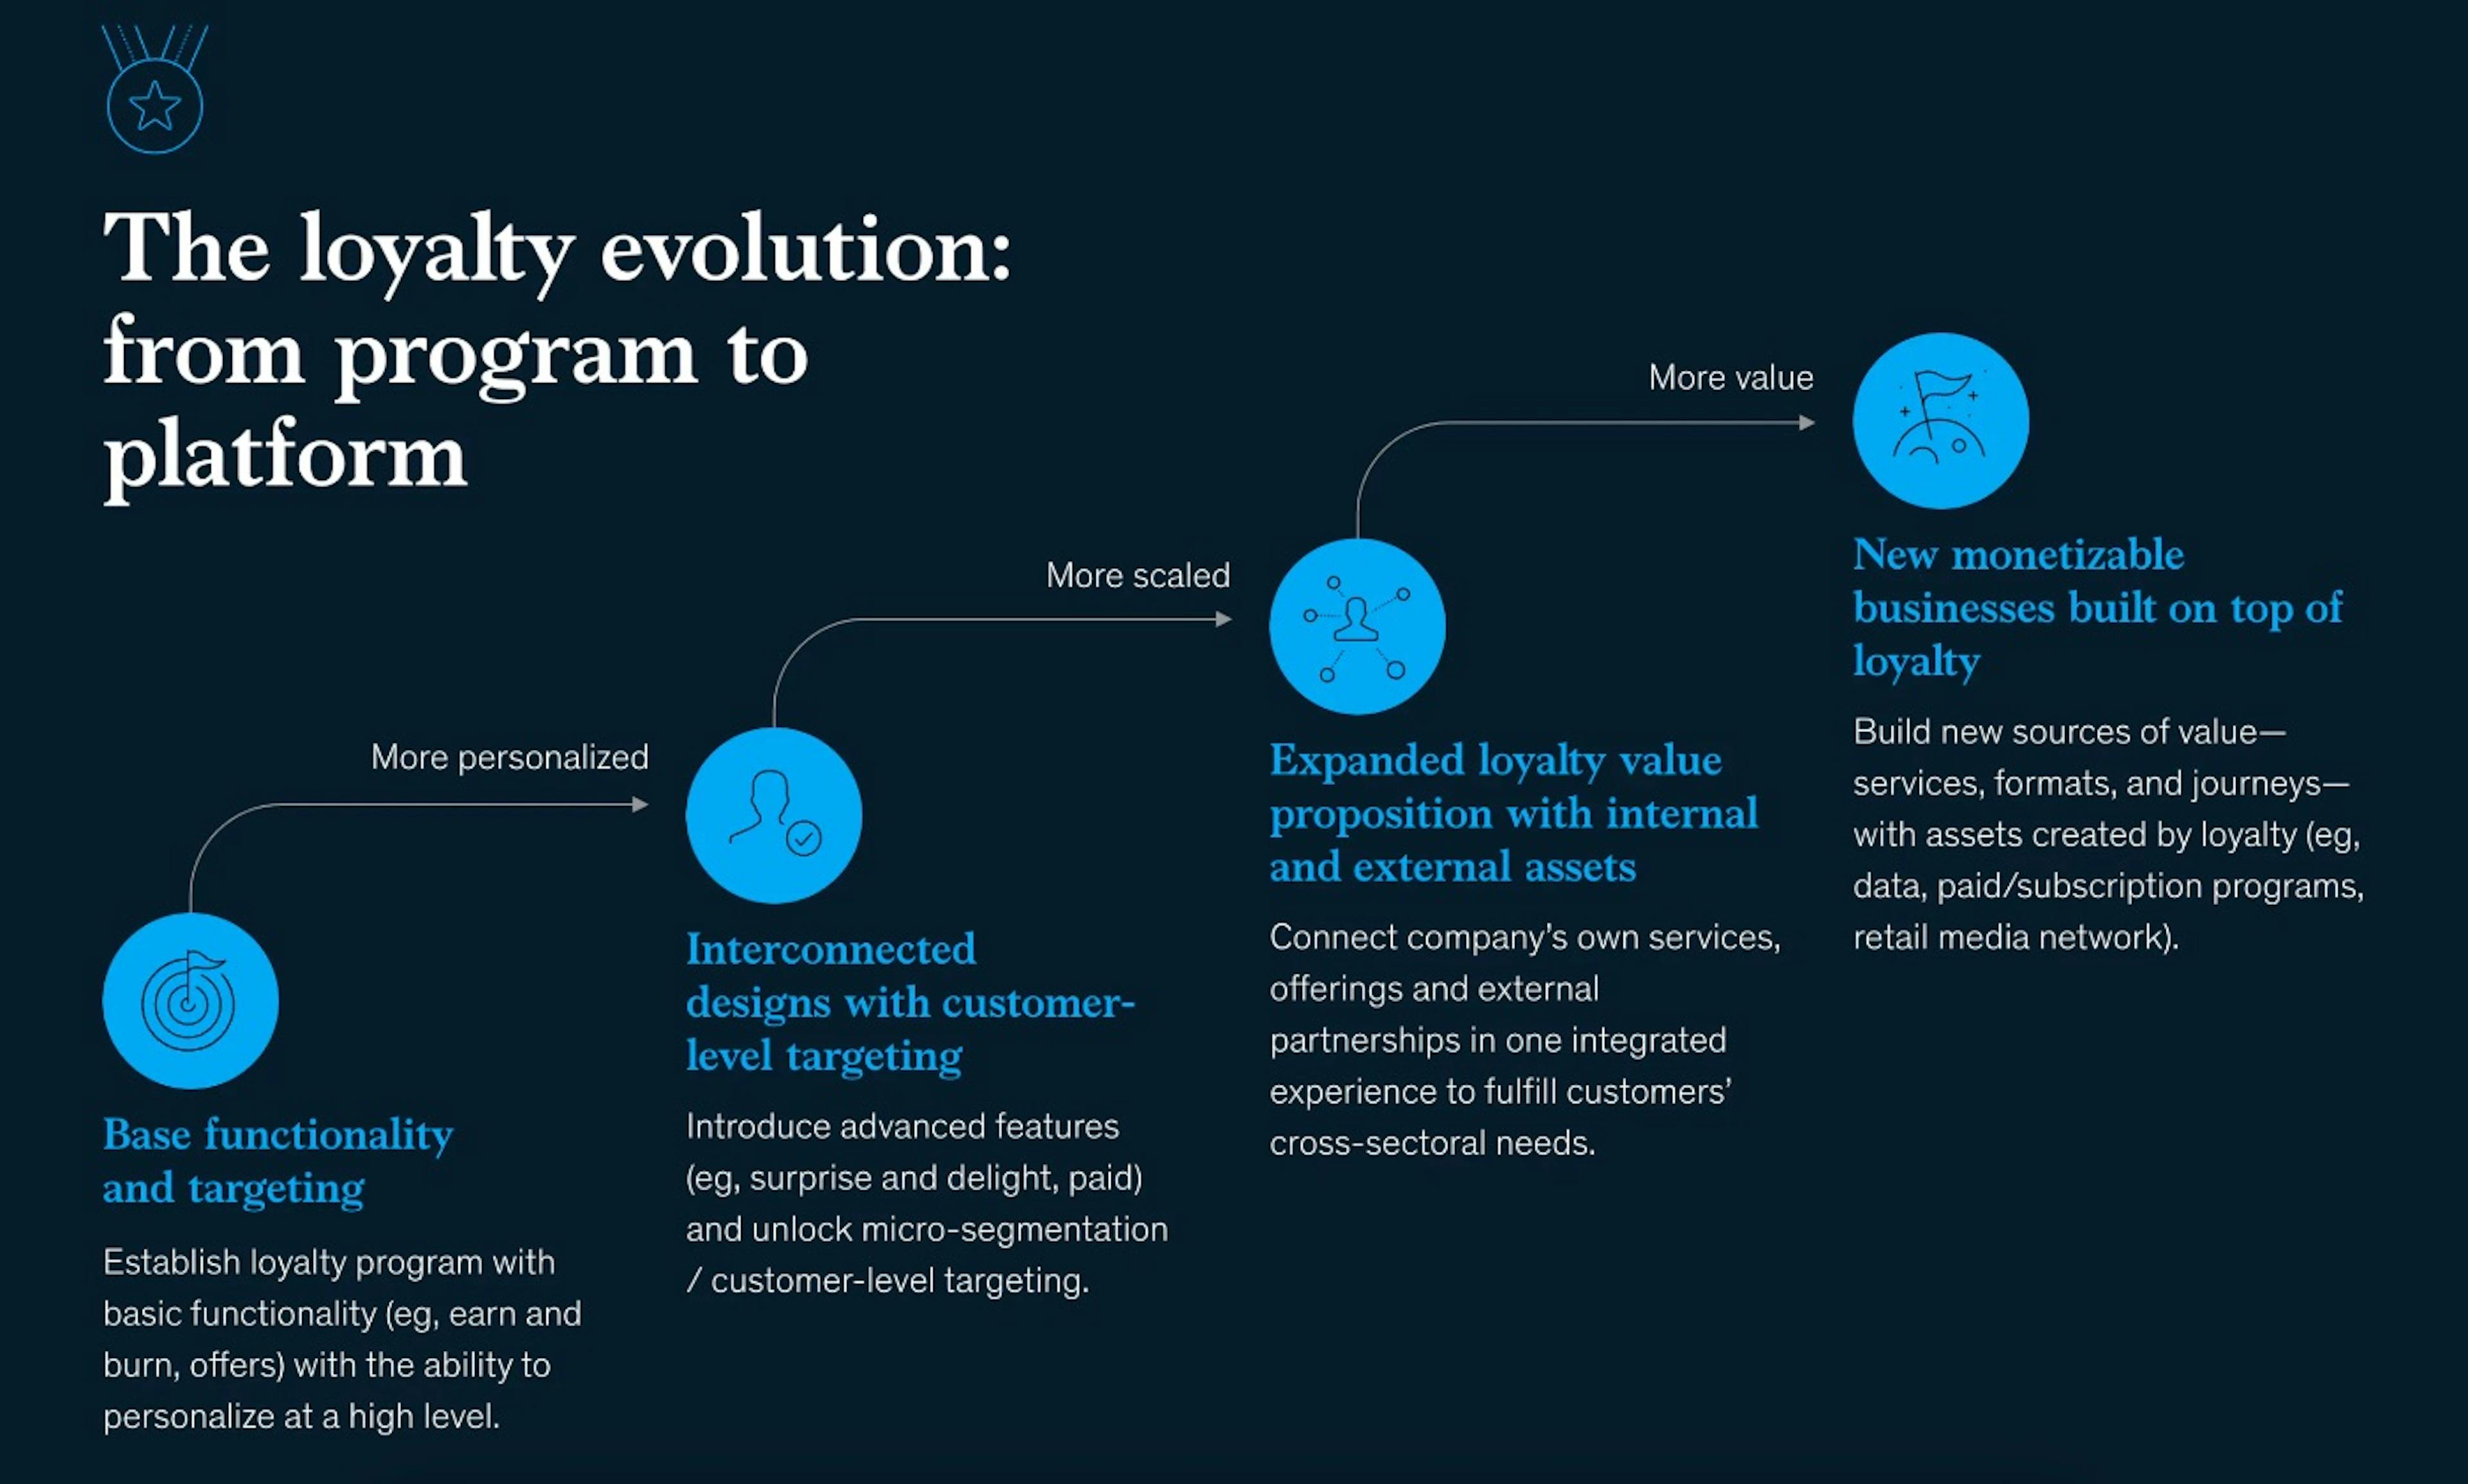 https://www.mckinsey.com/capabilities/growth-marketing-and-sales/our-insights/winning-in-loyalty